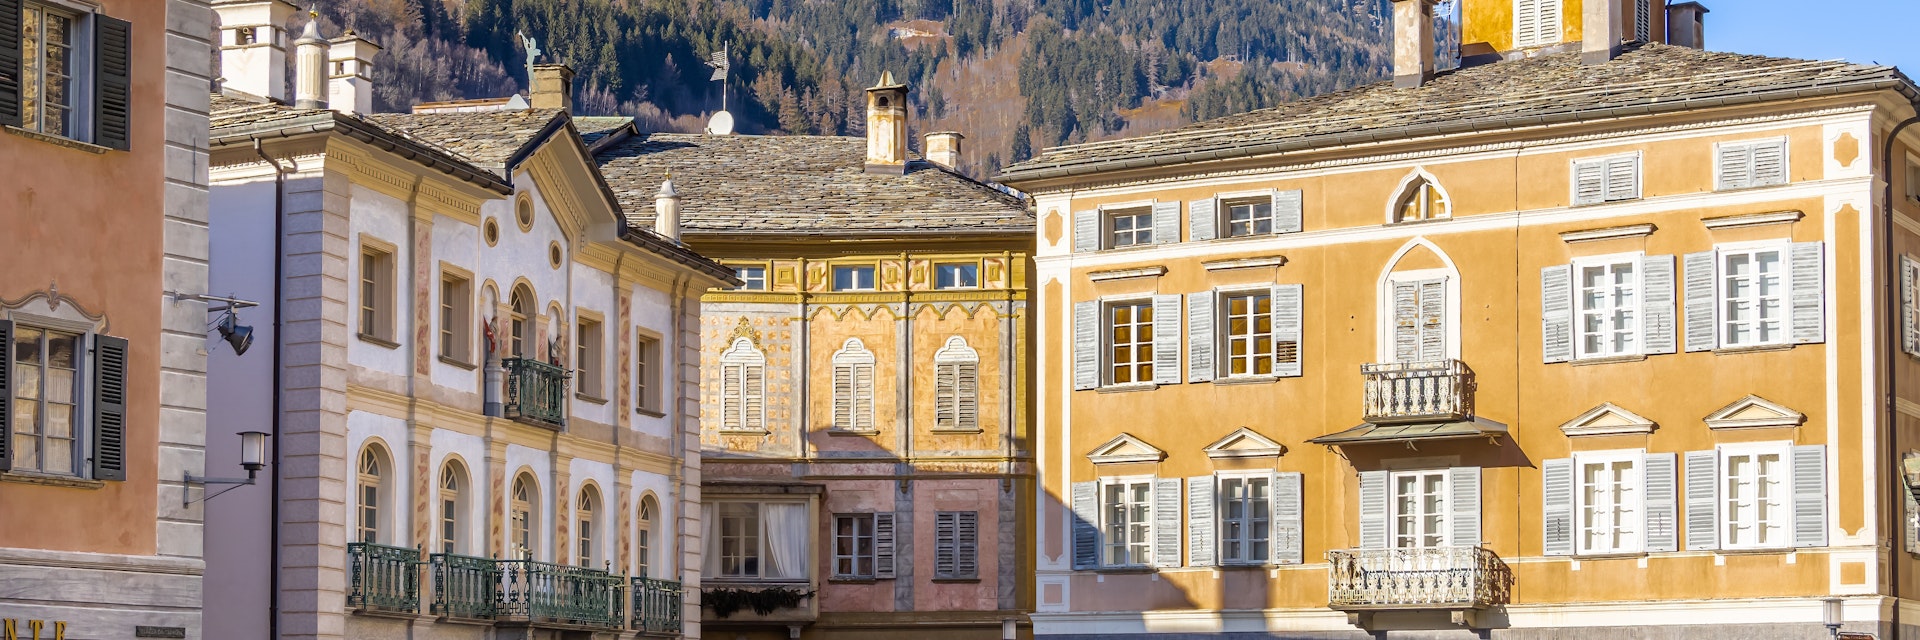 Historical square and houses of the old town of Poschiavo.